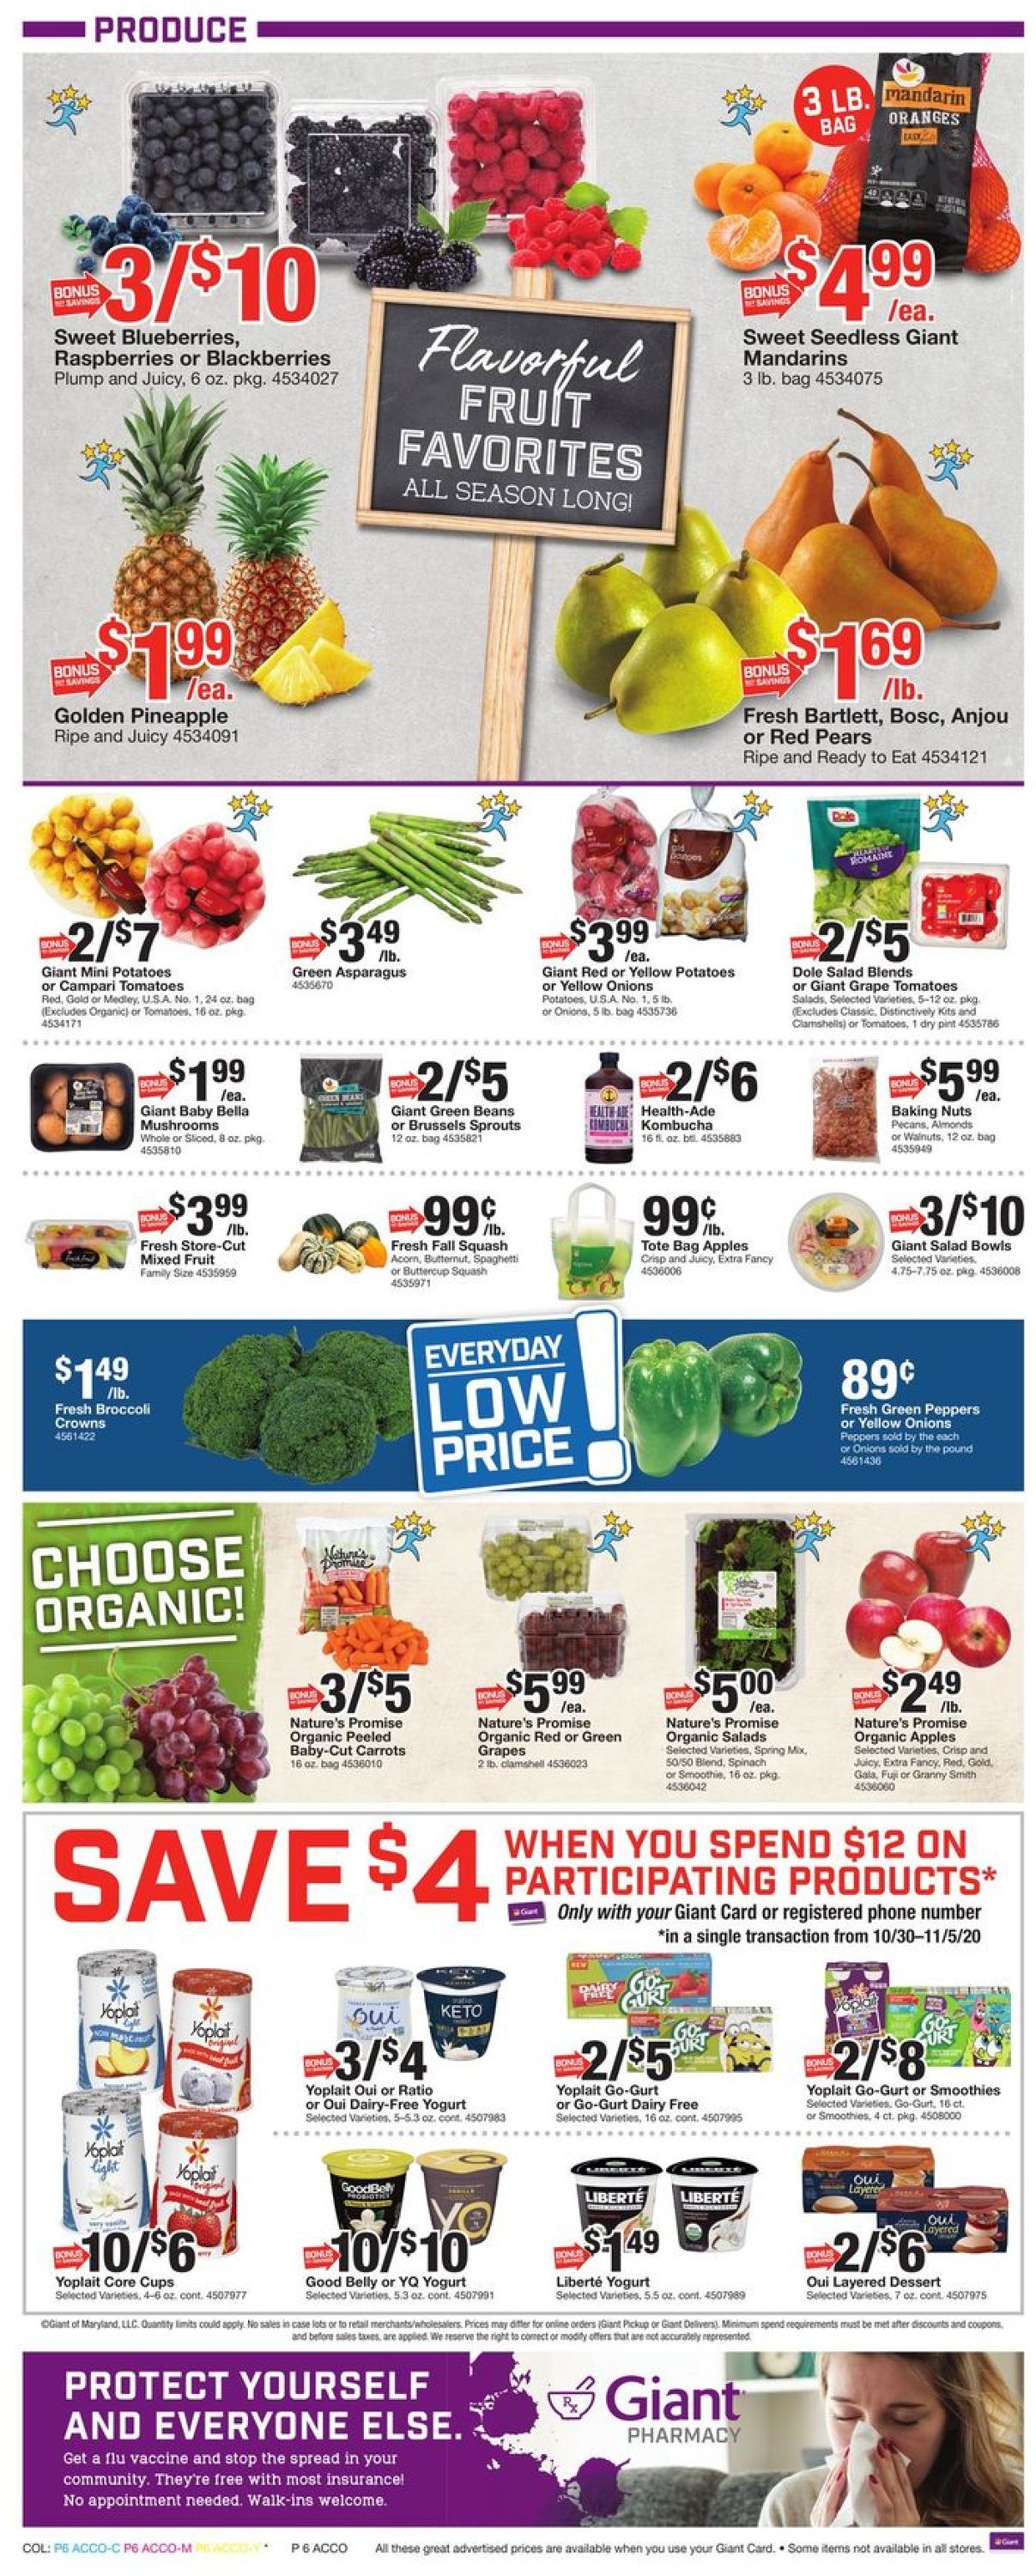 Giant Food Current weekly ad 10/30 - 11/05/2020 [8] - frequent-ads.com